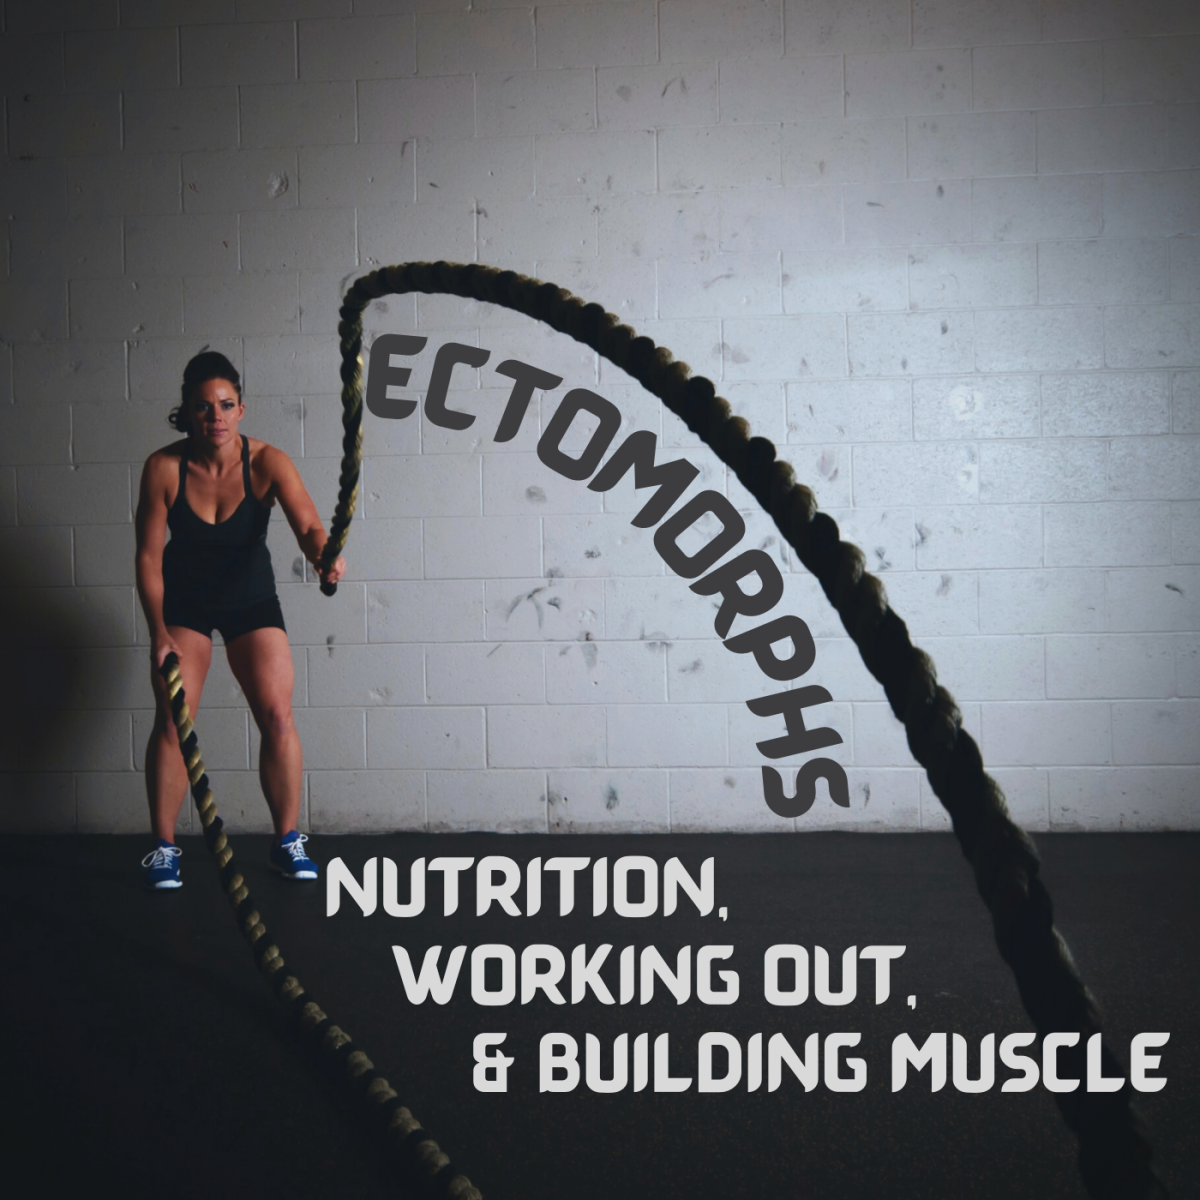 Paying attention to diet and how you work out will help ectomorphs build muscle. 